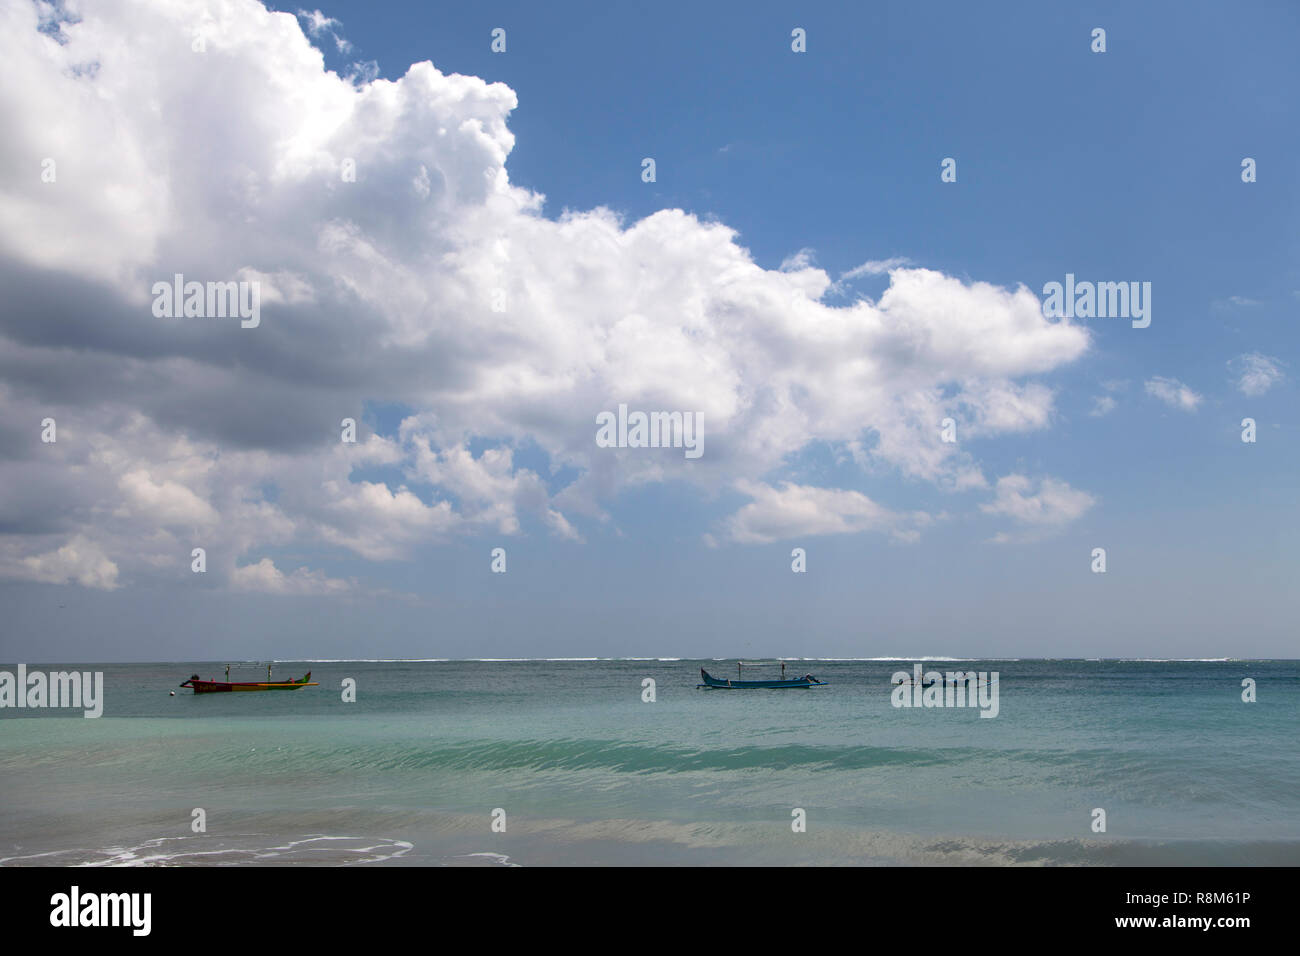 Indonesia is also a view of the famous beach of Kuta beach in Bali. Stock Photo